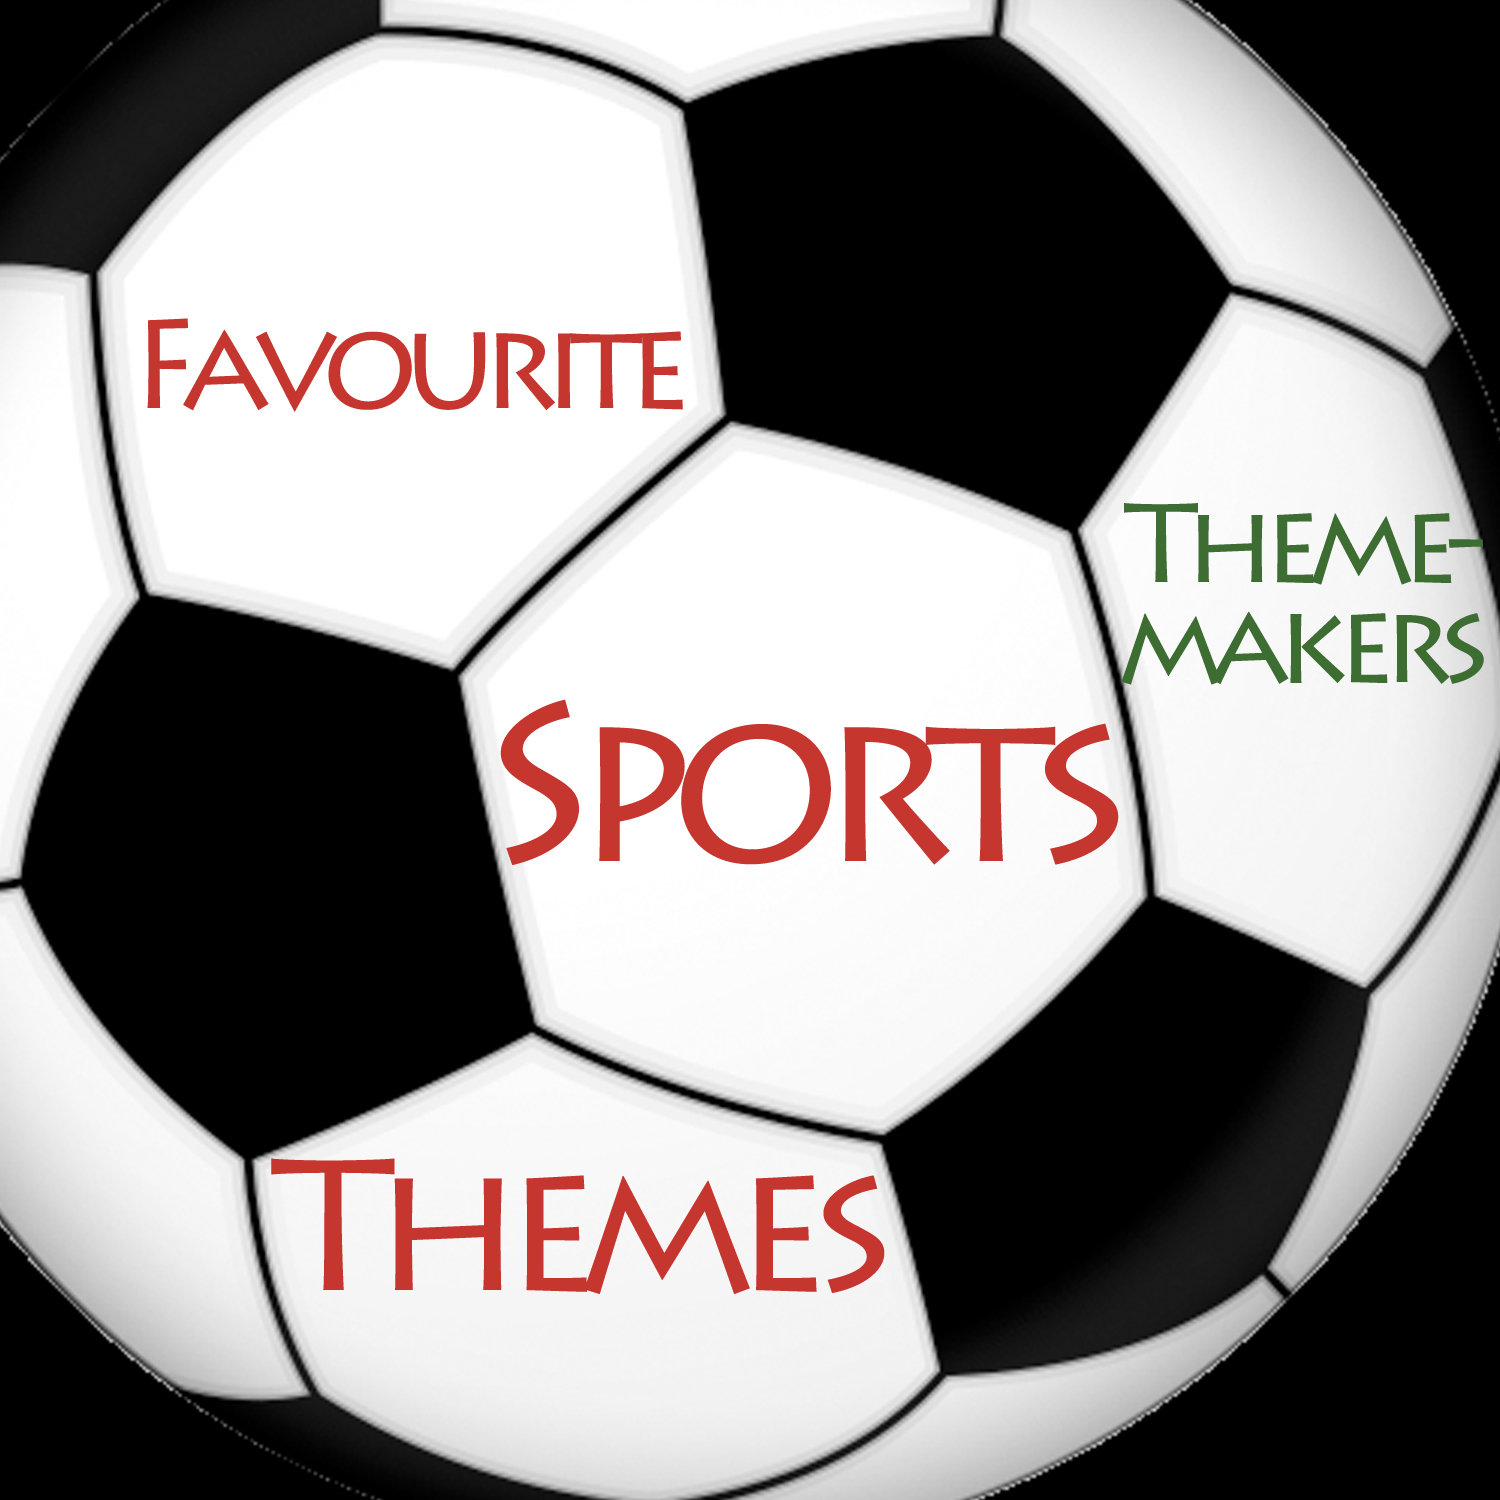 Me favourite sport. Favourite Sports. Sports Theme. Song about Sport. Favourites.